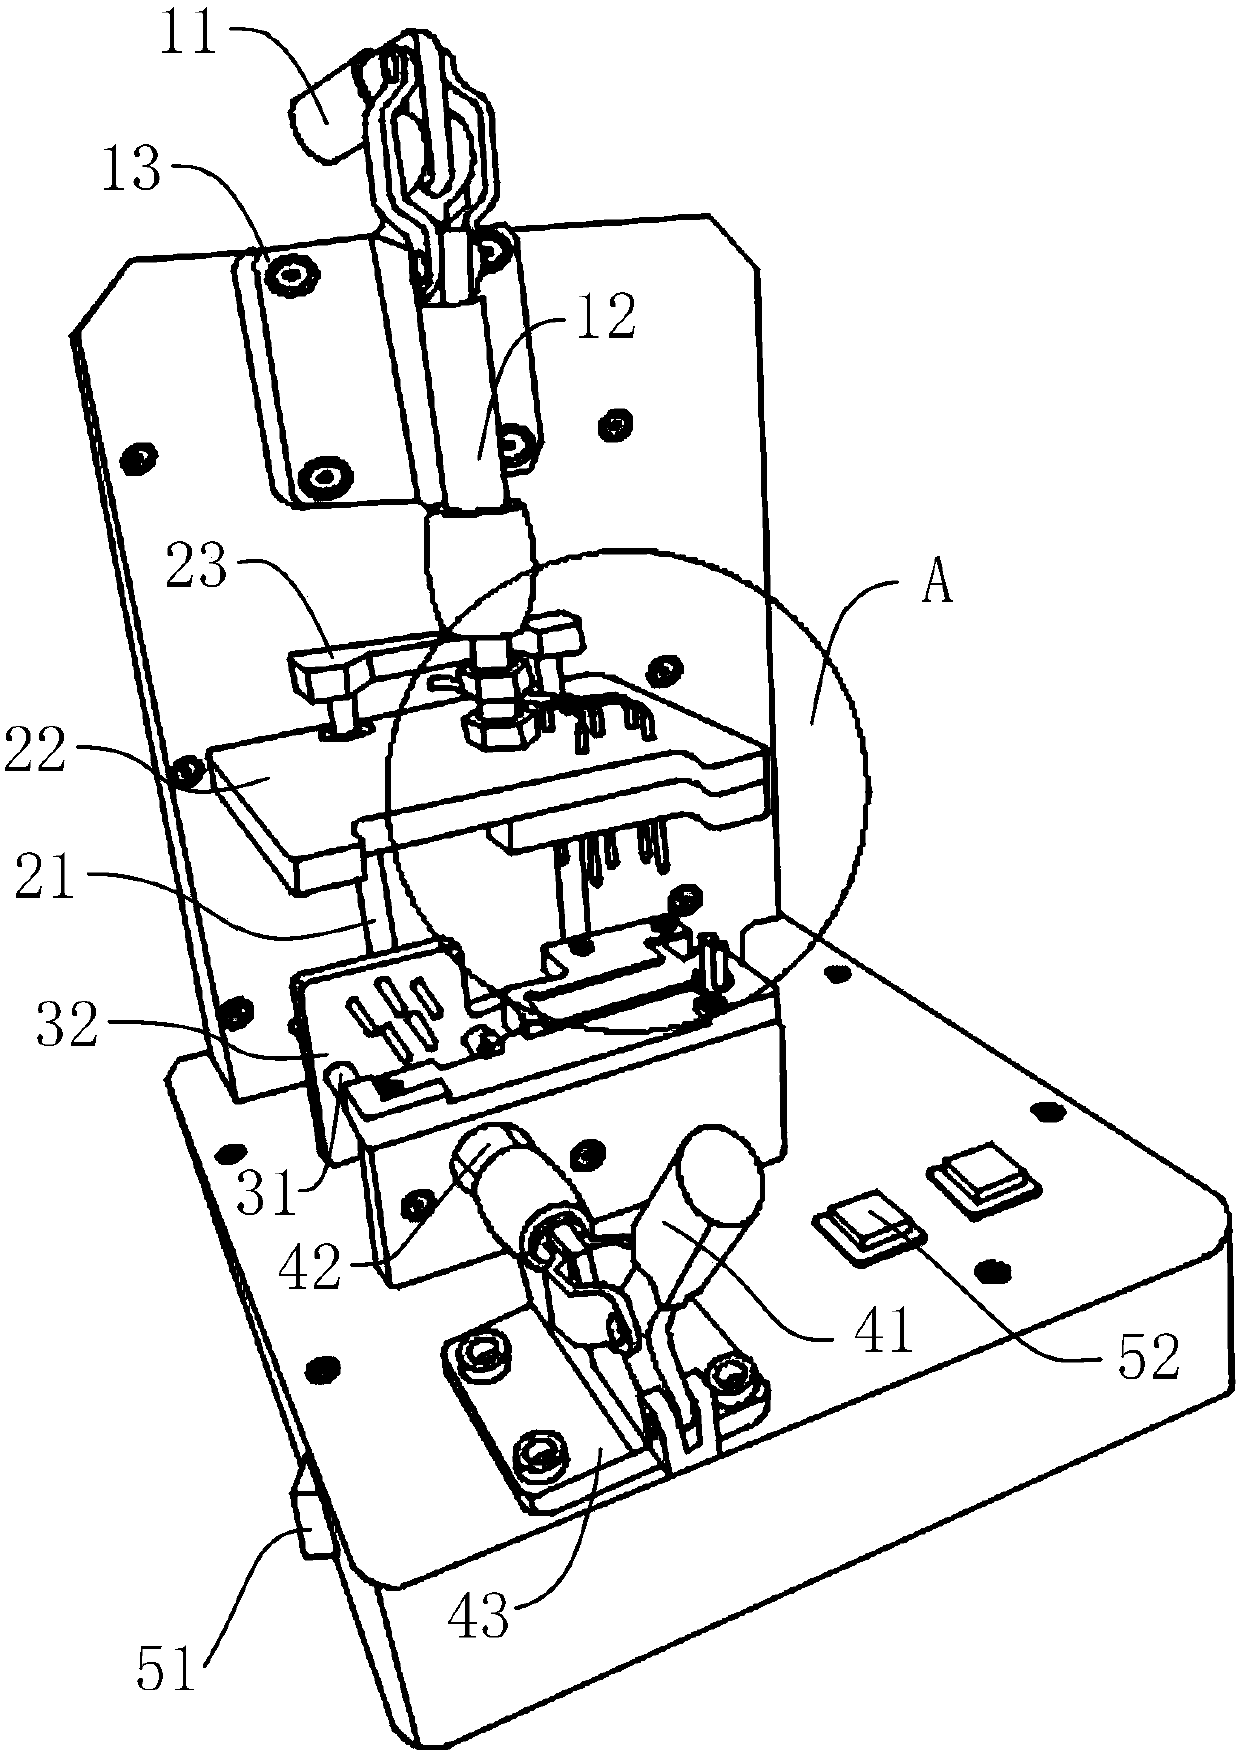 Double-sided circuit board testing device